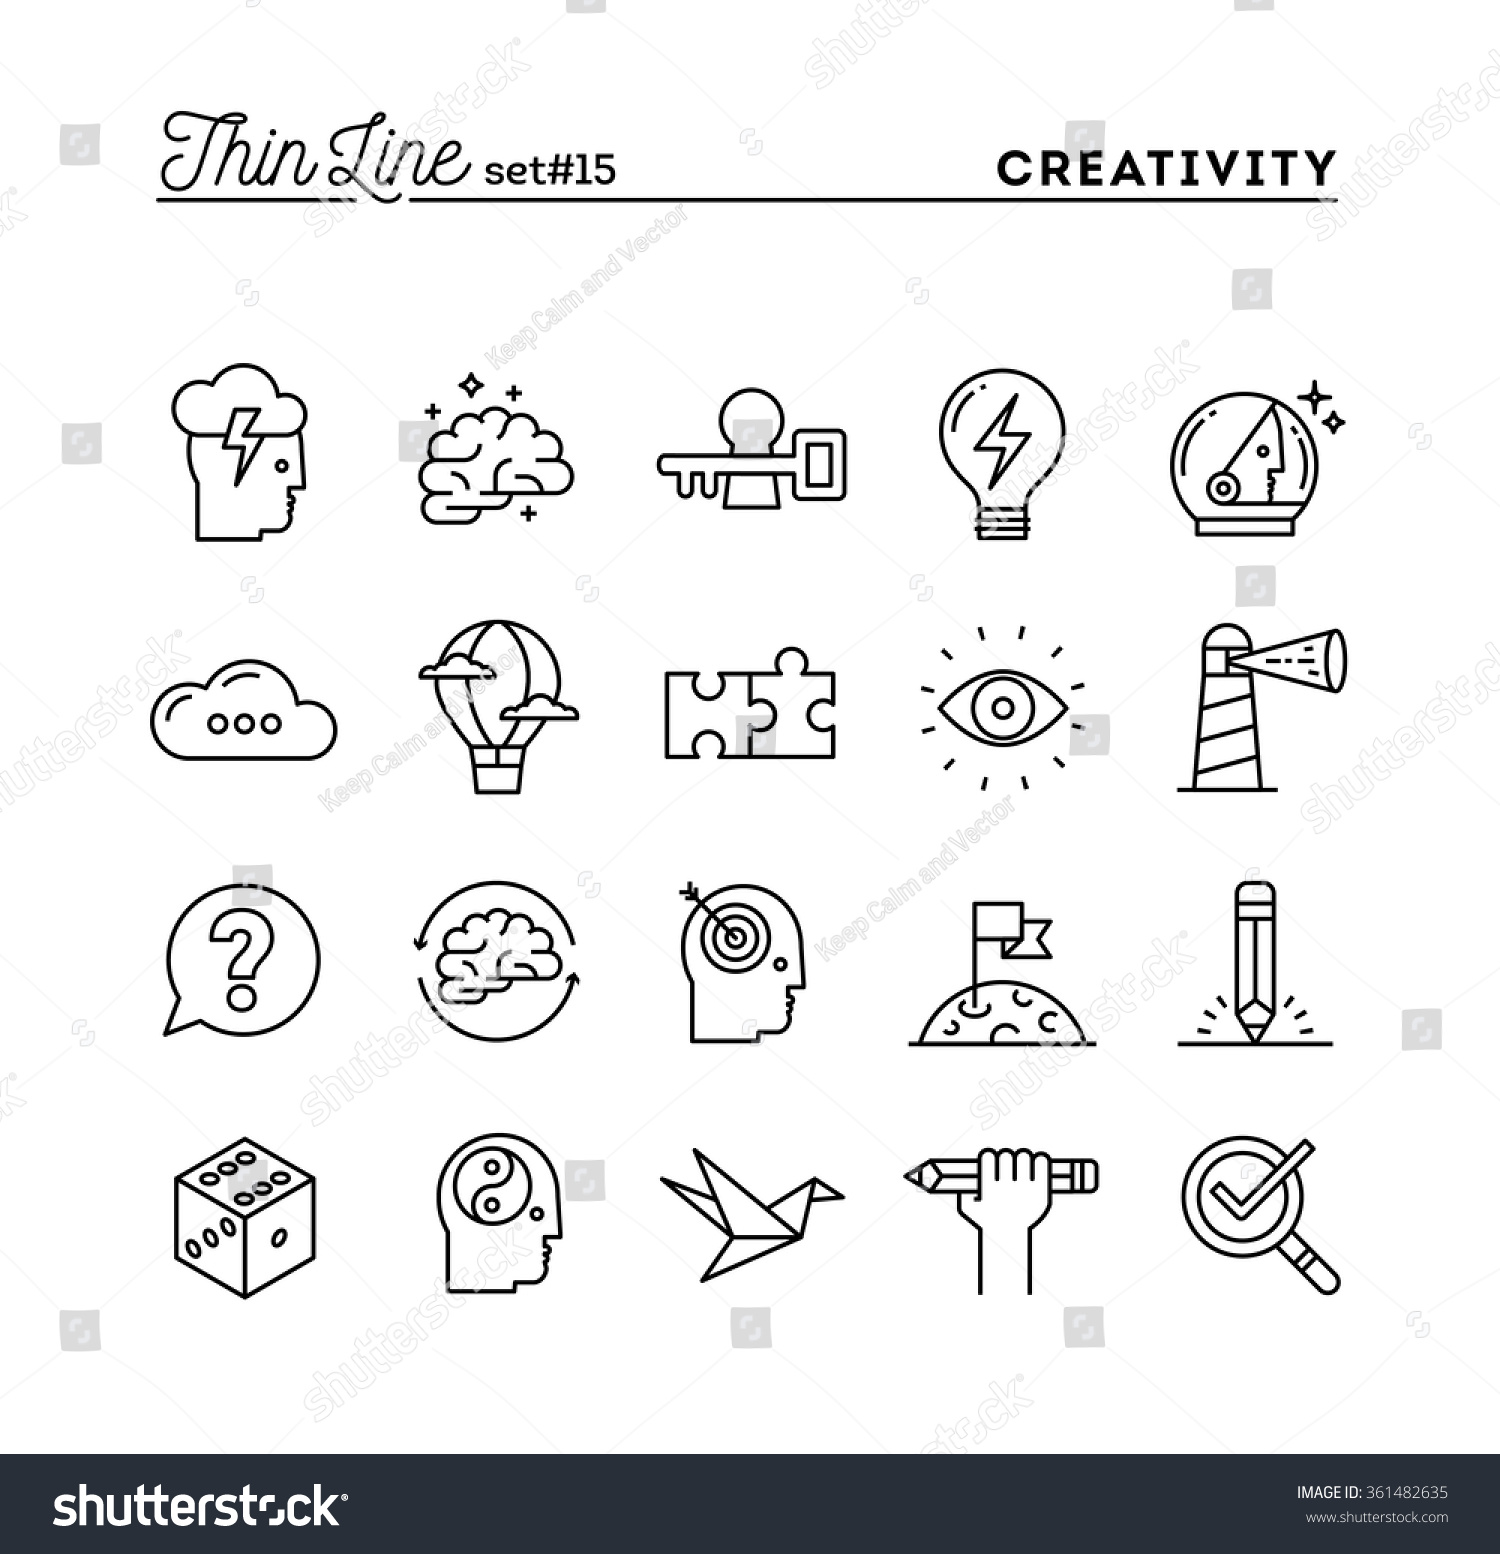 Creativity, imagination, problem solving, mind power and more, thin line icons set, vector illustration #361482635